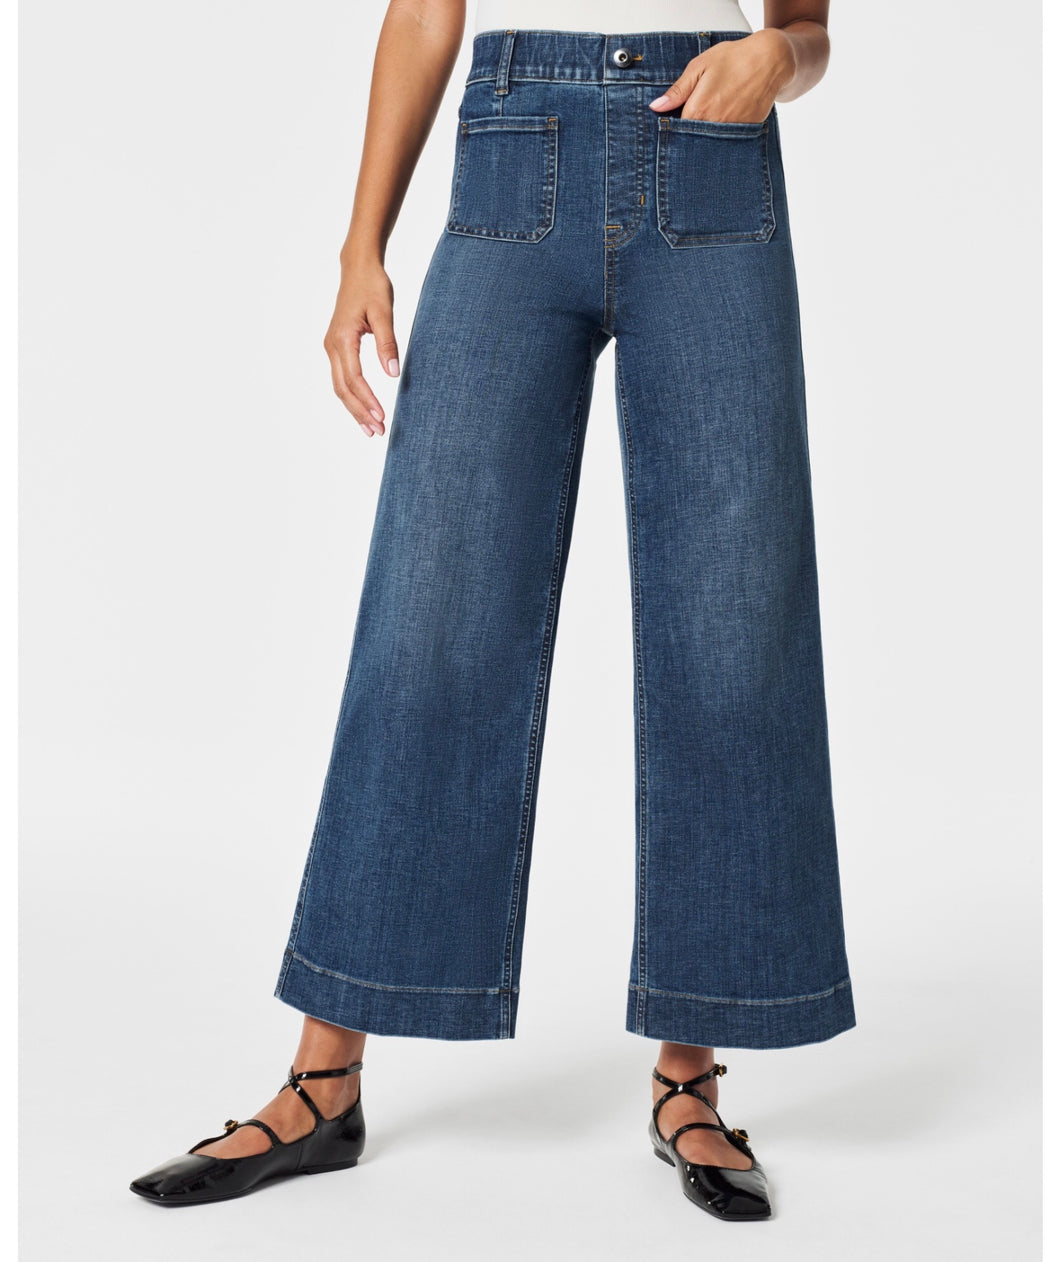 Spanx: Cropped Wide Leg Jeans in Shaded Blue